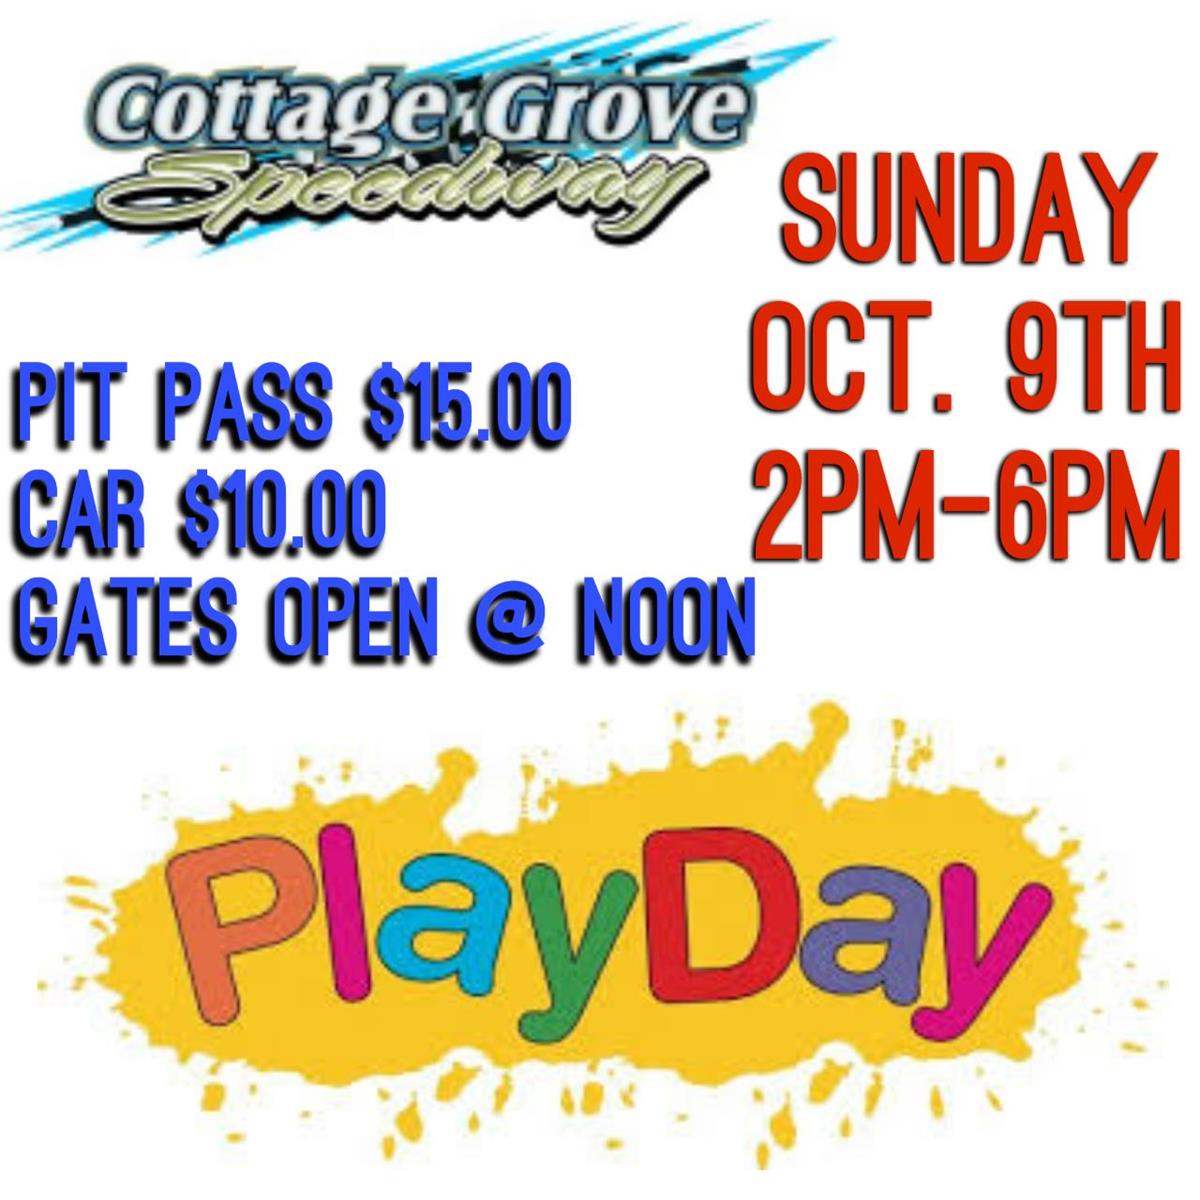 OPEN TRACK PLAYDAY THIS SUNDAY AT COTTAGE GROVE SPEEDWAY!!